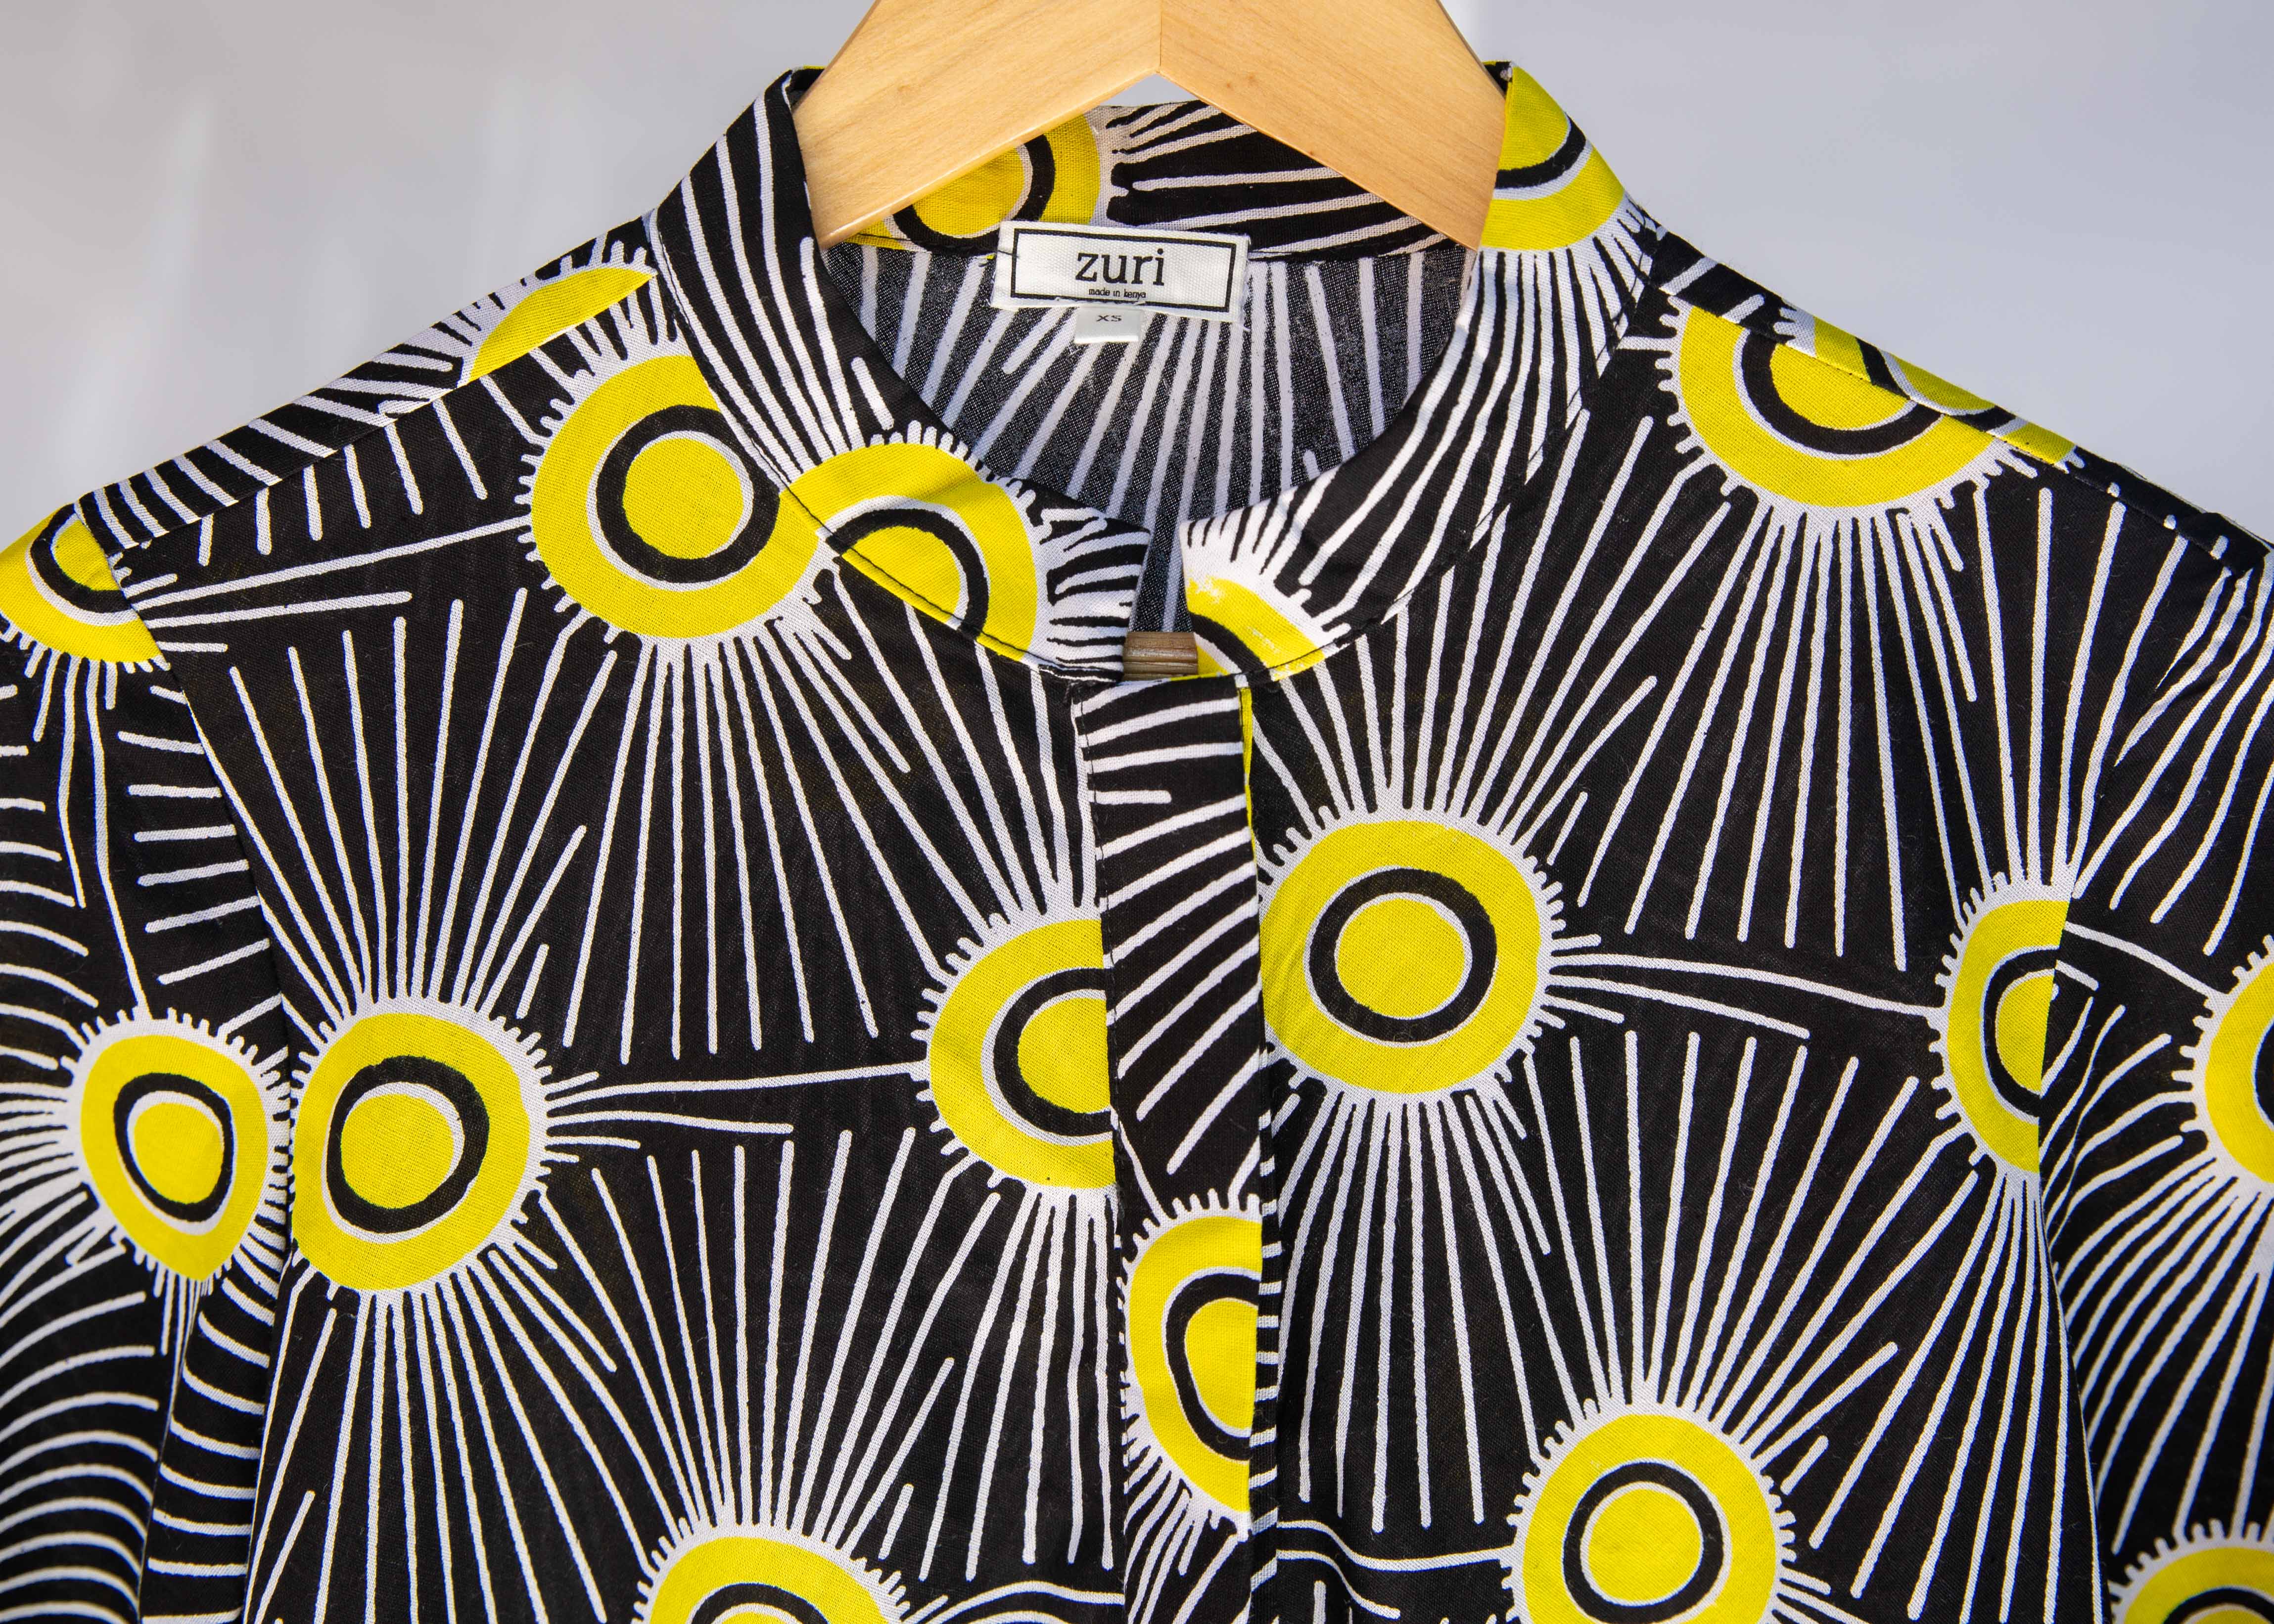 Display of Model wearing black and white dress with yellow burst print.